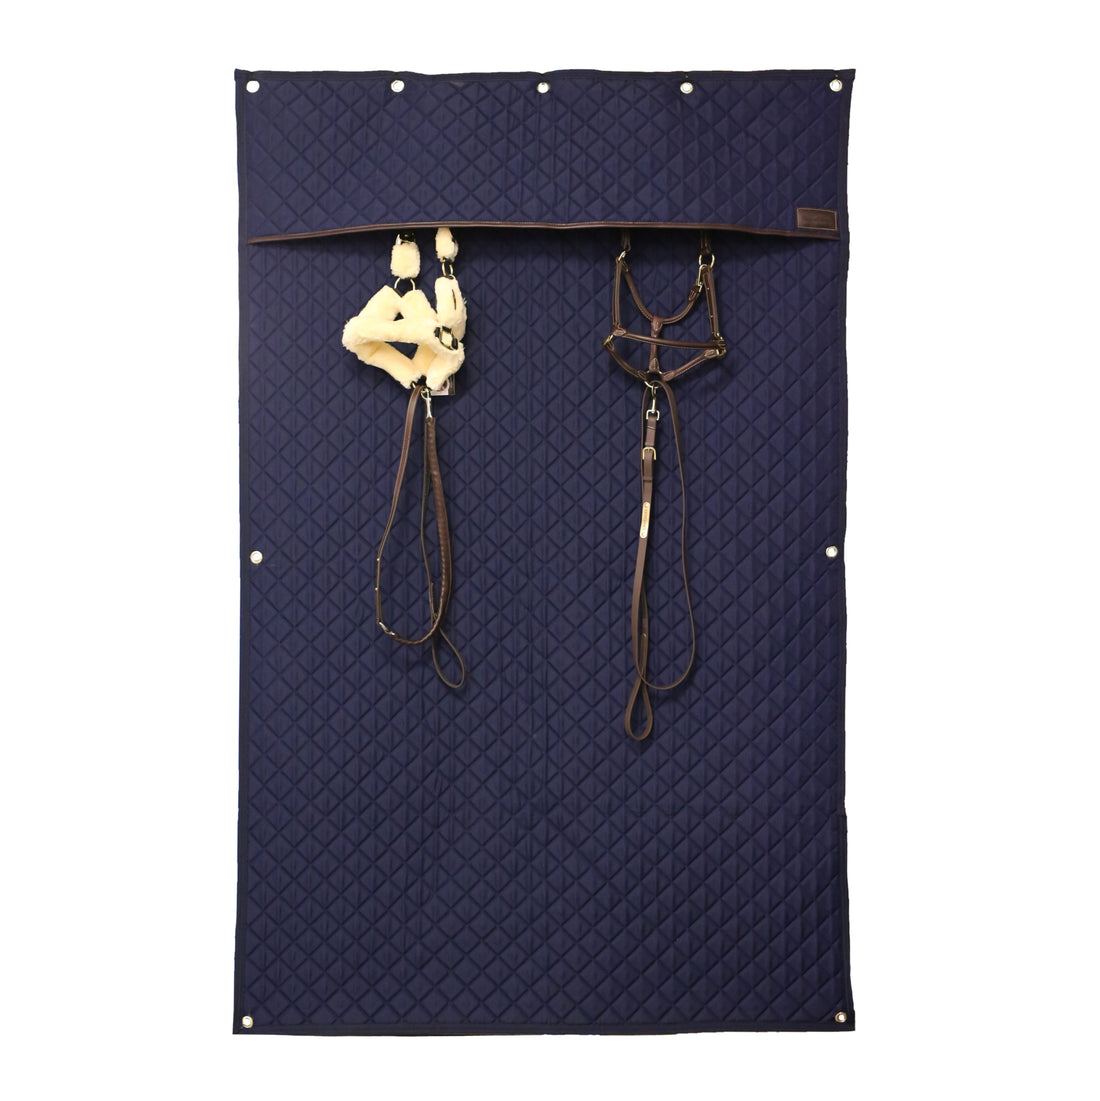 The Kentucky Stable curtain is perfect for storing your belongings in style whilst keeping them protected. 